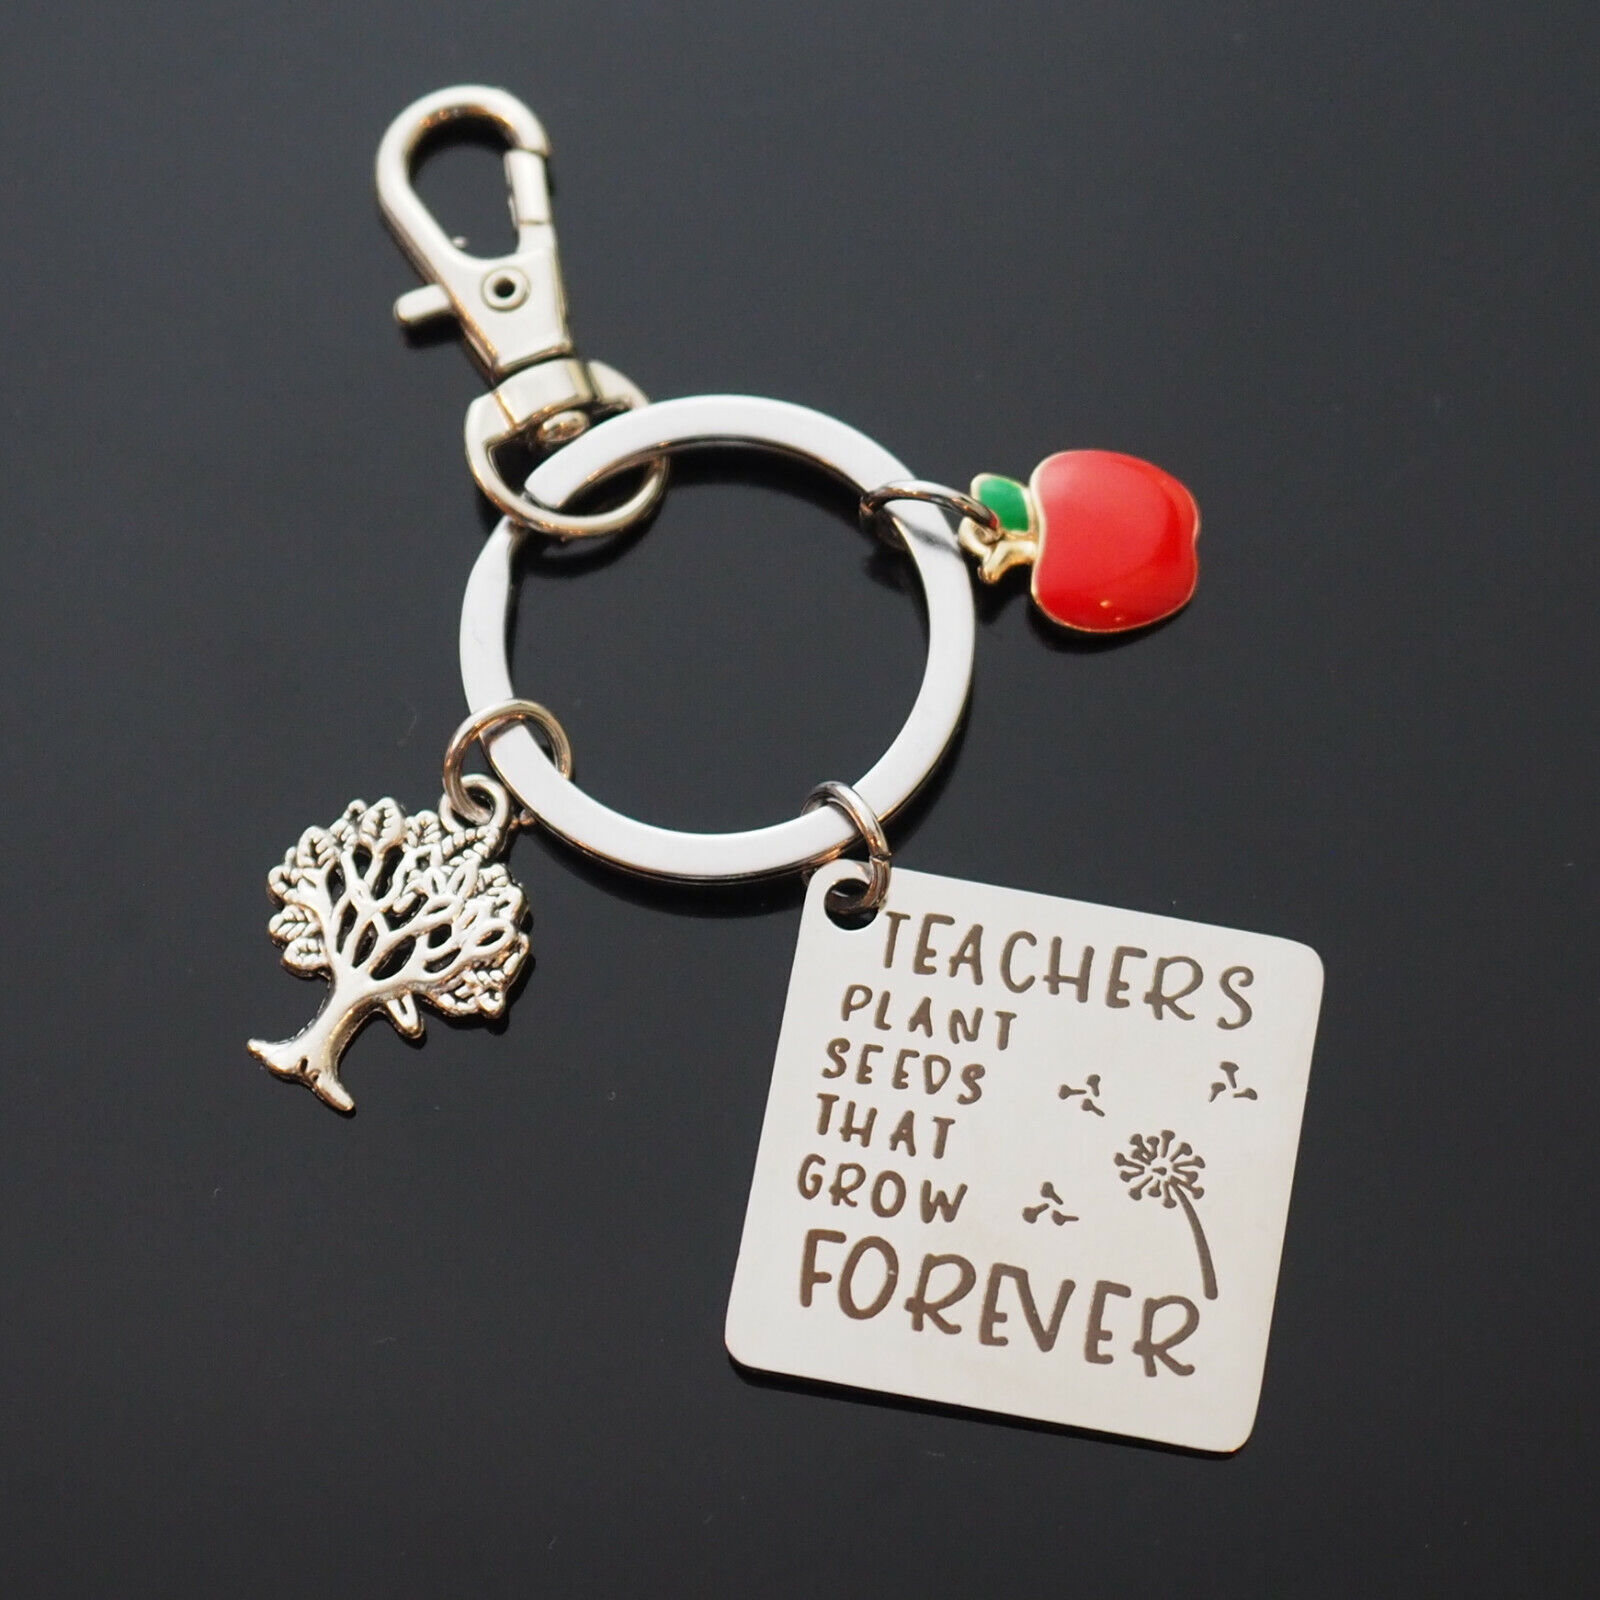 Teachers Plant a Seed Tree Forever Keychain Key Ring Apple Charm Thanks Gift